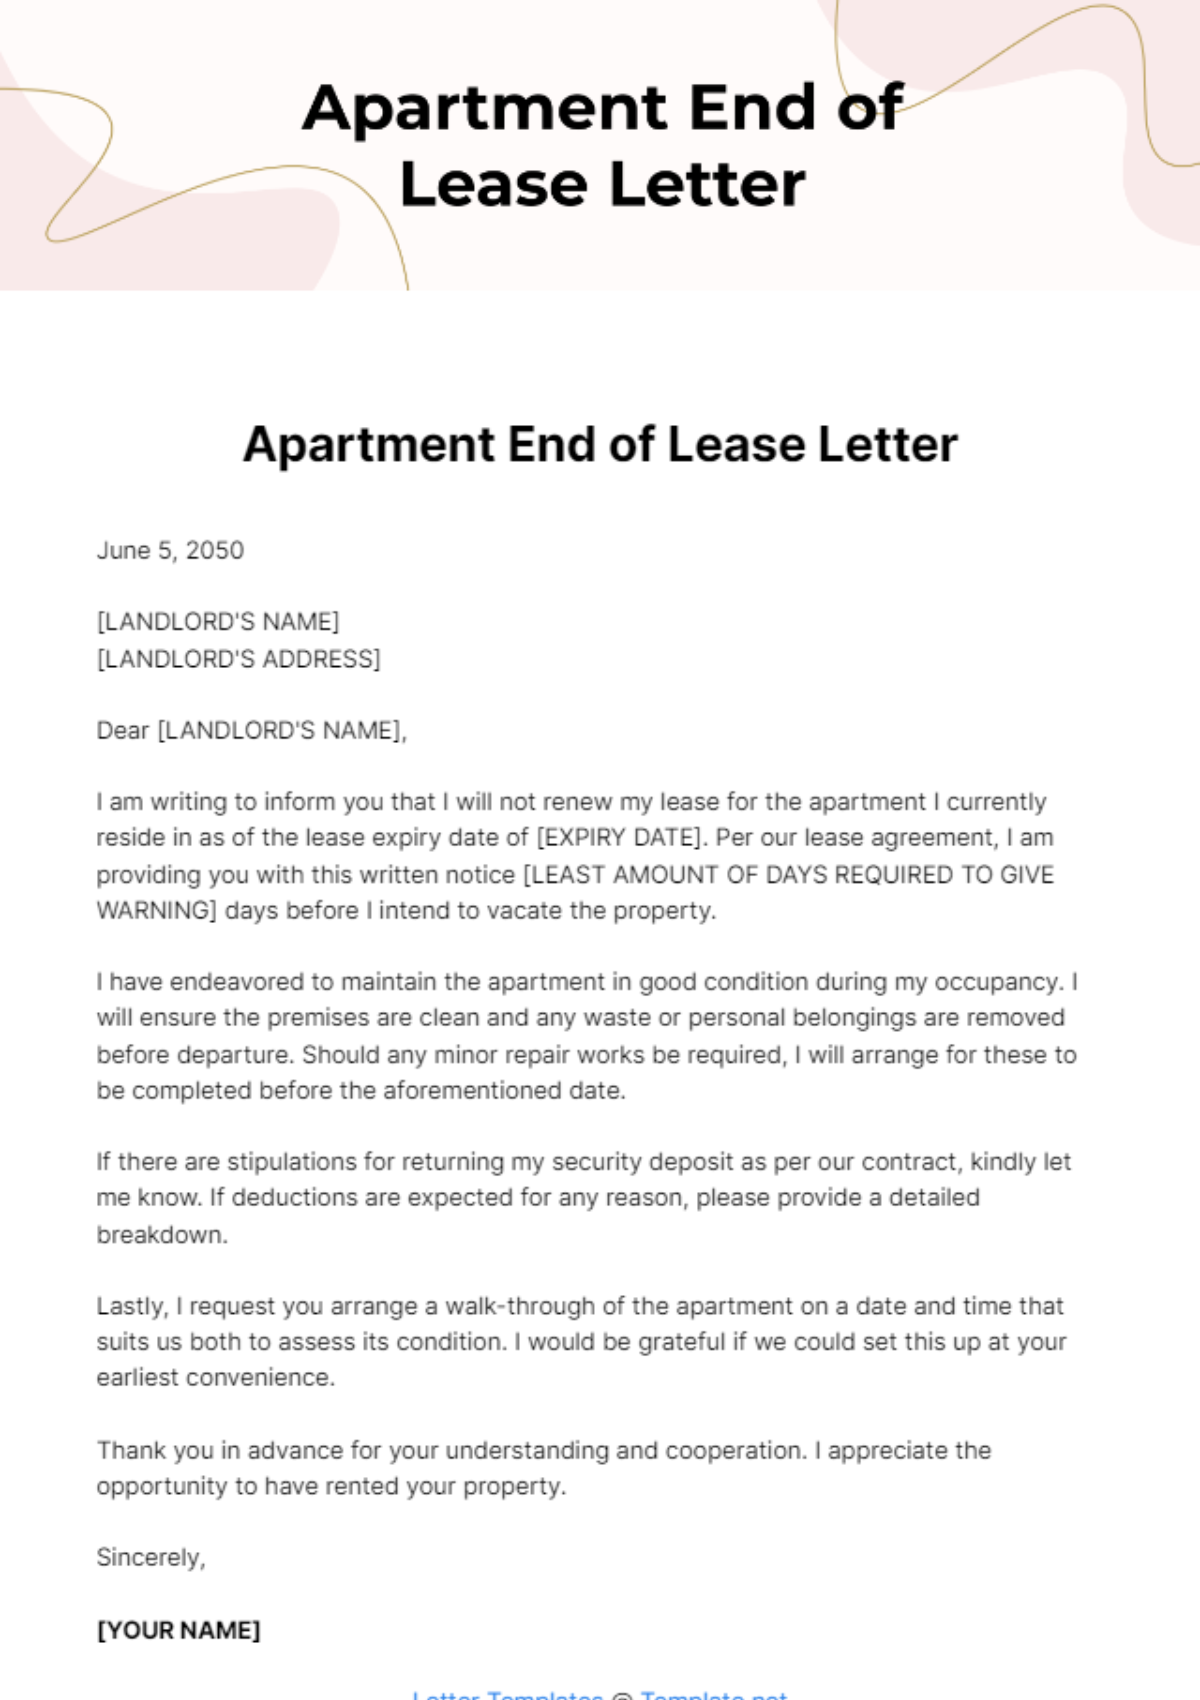 Free Apartment End of Lease Letter Template